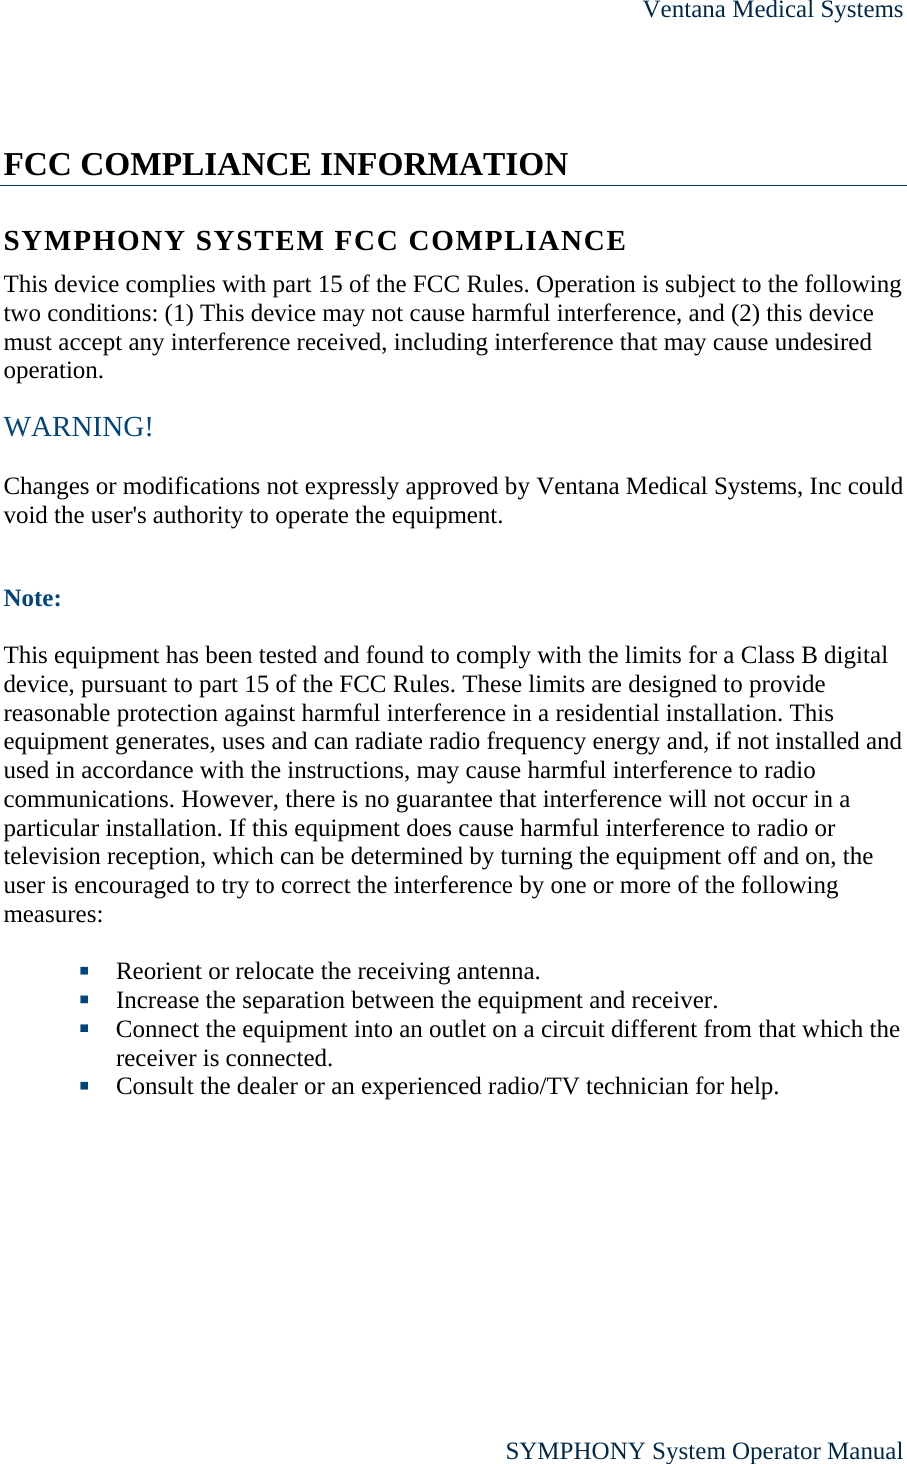 Ventana Medical Systems      SYMPHONY System Operator Manual  FCC COMPLIANCE INFORMATION SYMPHONY SYSTEM FCC COMPLIANCE This device complies with part 15 of the FCC Rules. Operation is subject to the following two conditions: (1) This device may not cause harmful interference, and (2) this device must accept any interference received, including interference that may cause undesired operation. WARNING!  Changes or modifications not expressly approved by Ventana Medical Systems, Inc could void the user&apos;s authority to operate the equipment.  Note:  This equipment has been tested and found to comply with the limits for a Class B digital device, pursuant to part 15 of the FCC Rules. These limits are designed to provide reasonable protection against harmful interference in a residential installation. This equipment generates, uses and can radiate radio frequency energy and, if not installed and used in accordance with the instructions, may cause harmful interference to radio communications. However, there is no guarantee that interference will not occur in a particular installation. If this equipment does cause harmful interference to radio or television reception, which can be determined by turning the equipment off and on, the user is encouraged to try to correct the interference by one or more of the following measures:   Reorient or relocate the receiving antenna.  Increase the separation between the equipment and receiver.  Connect the equipment into an outlet on a circuit different from that which the receiver is connected.  Consult the dealer or an experienced radio/TV technician for help.  